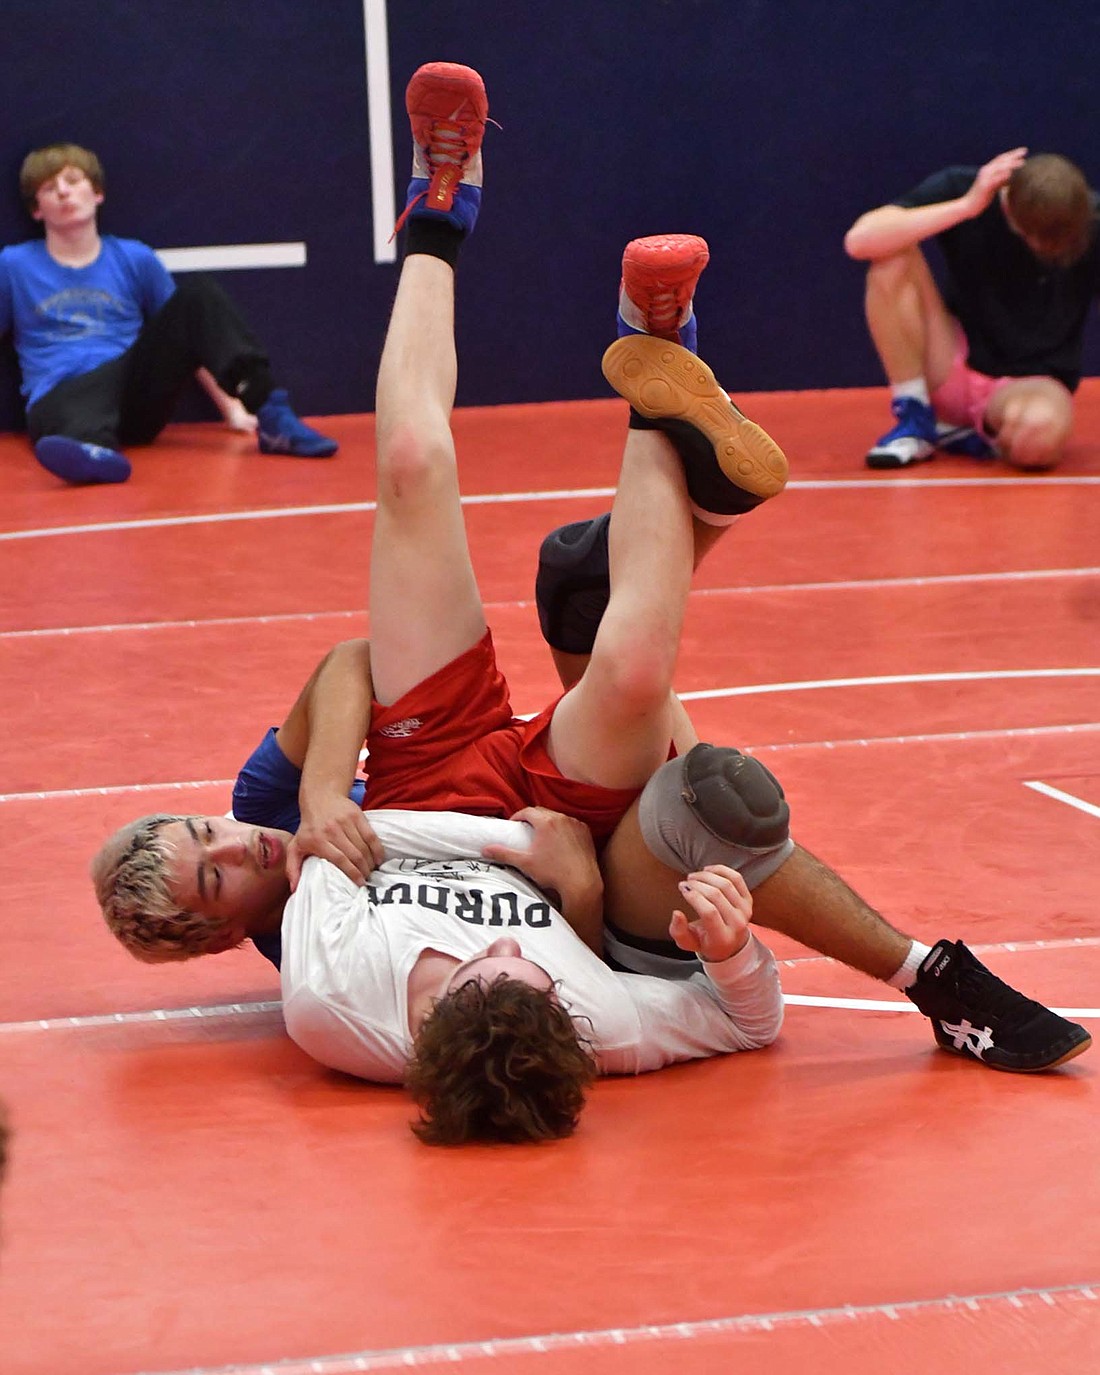 Jay County High School’s Tony Wood (behind) and Jacob Robinson (front) demonstrate a far wrist tilt during practice on Thursday. The JCHS boys wrestling team just started practices last week and are preparing for the season opener against Centerville on Nov. 28. (The Commercial Review/Andrew Balko)